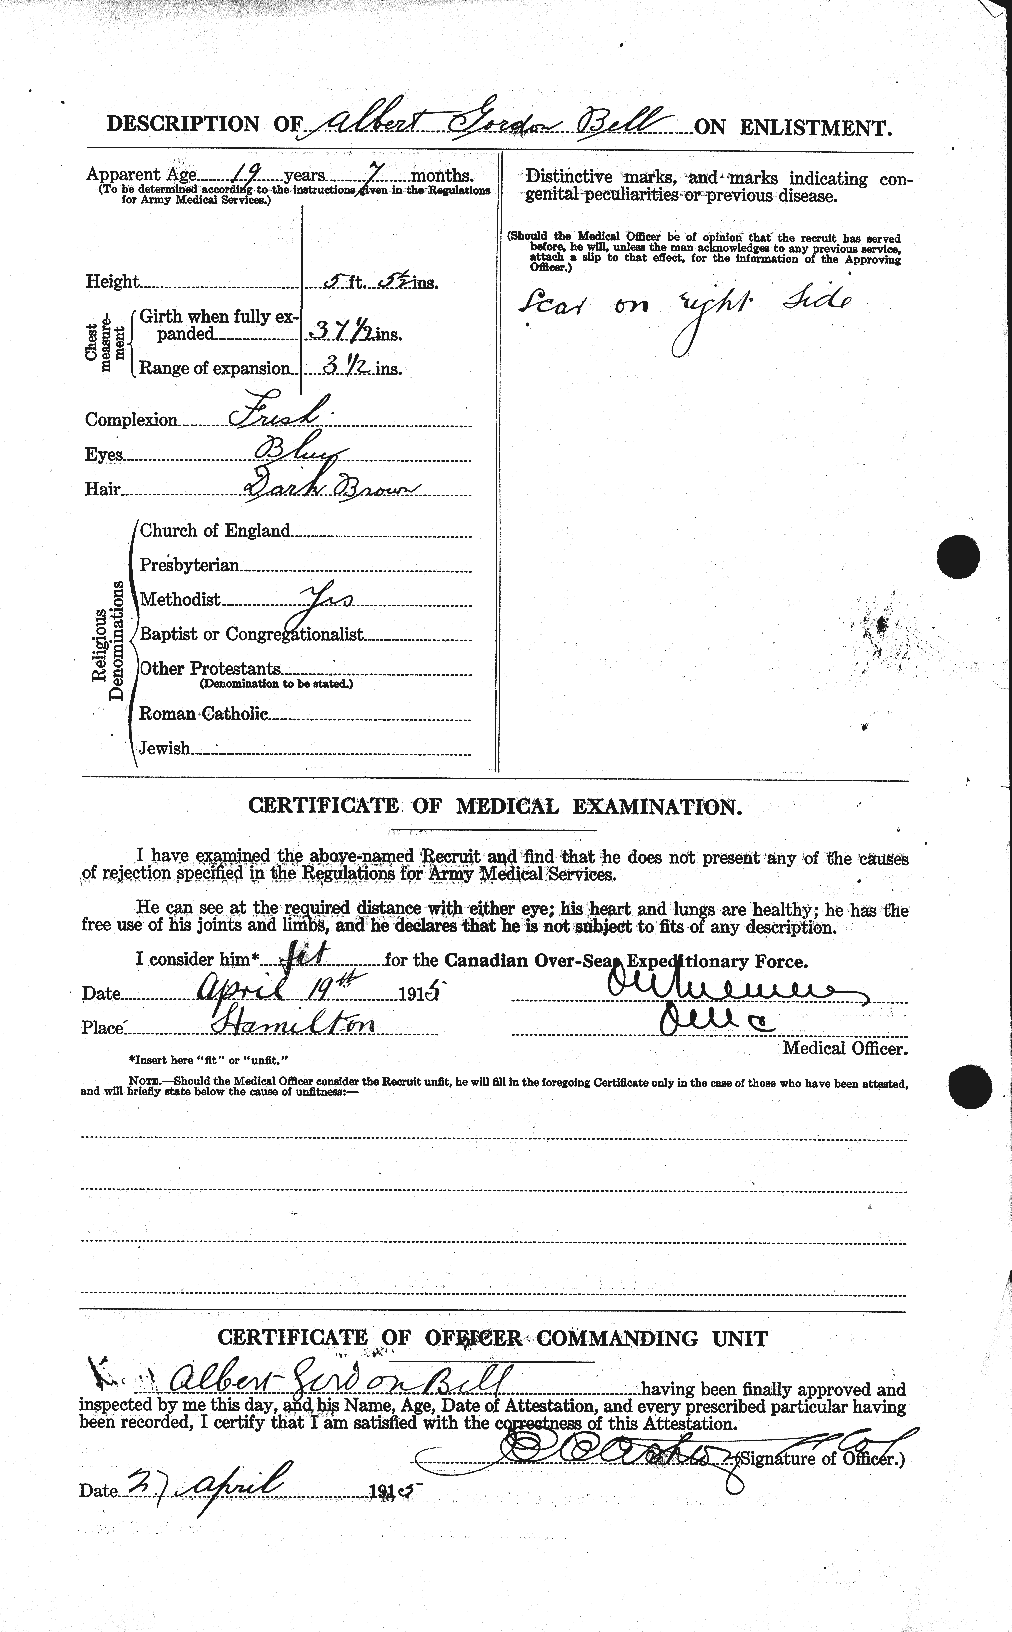 Personnel Records of the First World War - CEF 230120b